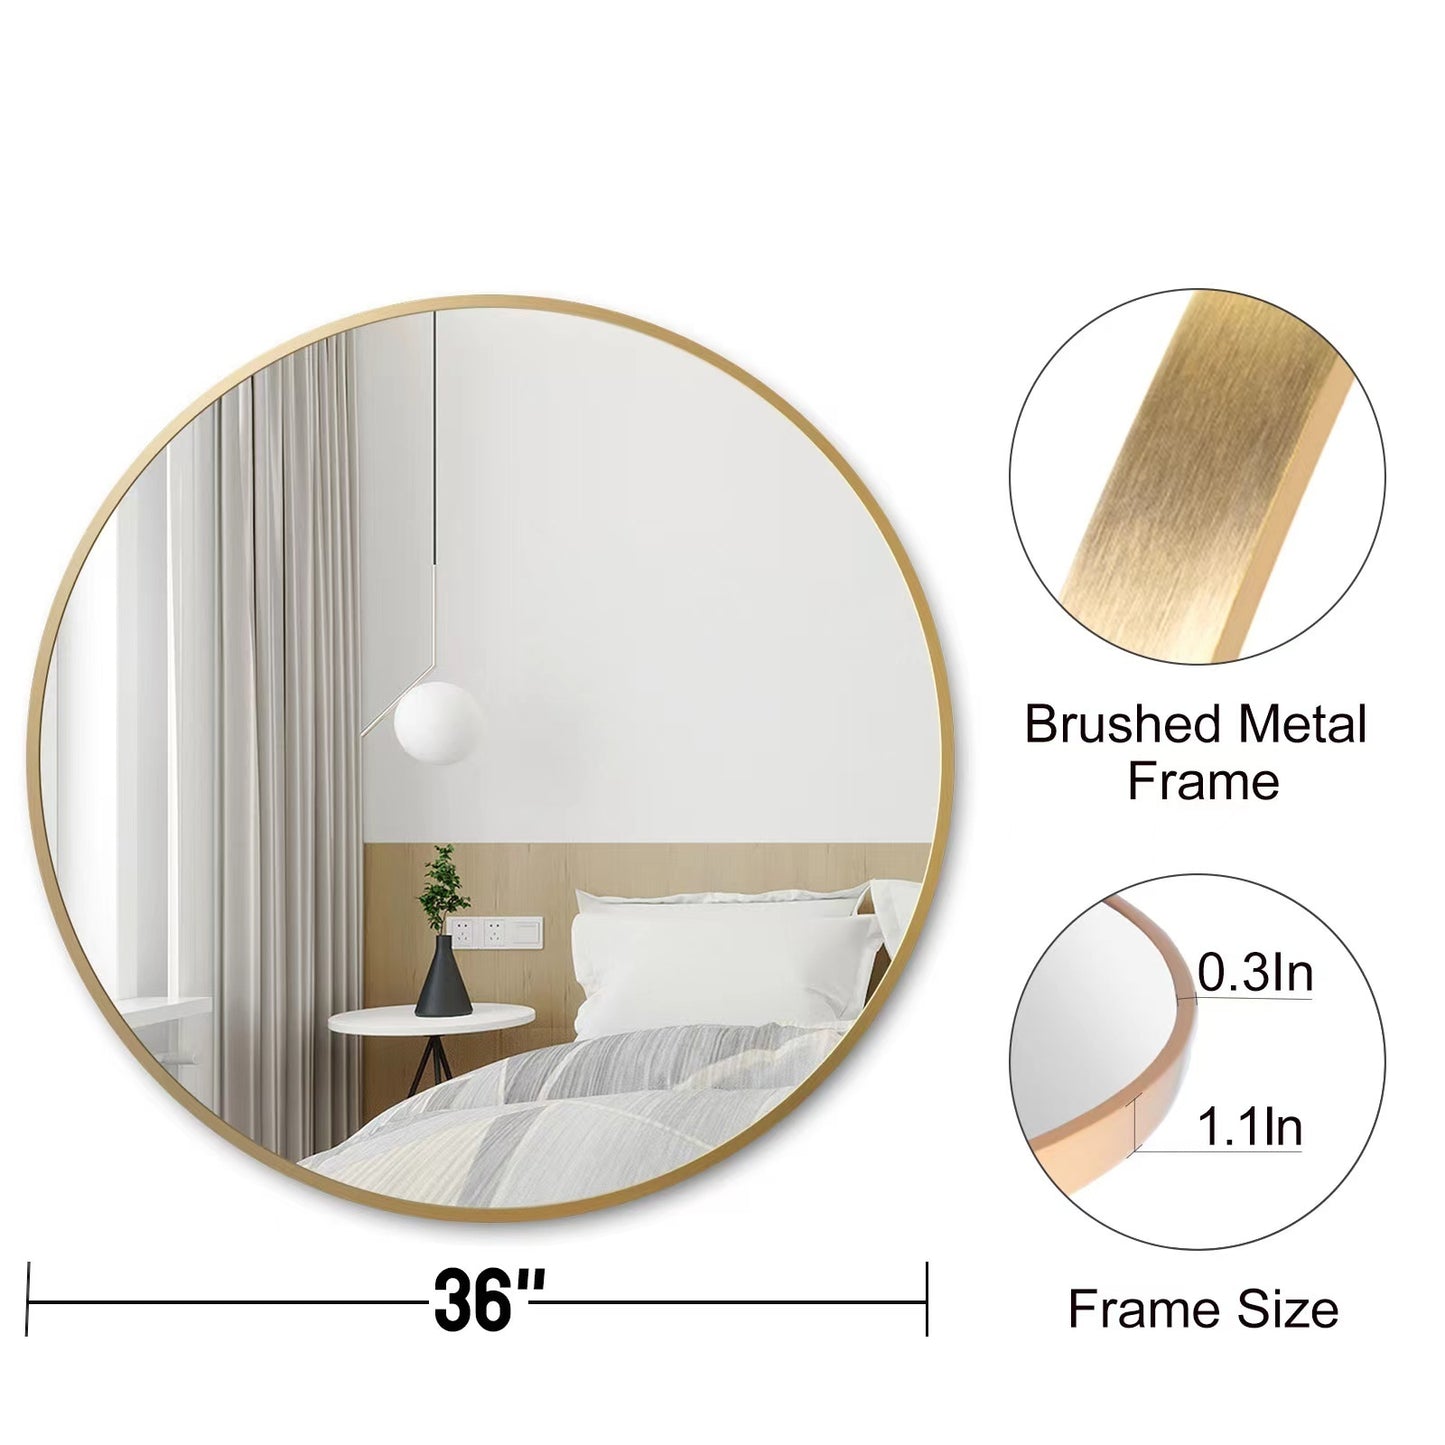 Circle Mirror 36 Inch, Gold Round Wall Mirror Suitable for Bedroom, Living Room, Bathroom, Entryway Wall Decor and More, Brushed Aluminum Frame Large Circle Mirrors for Wall